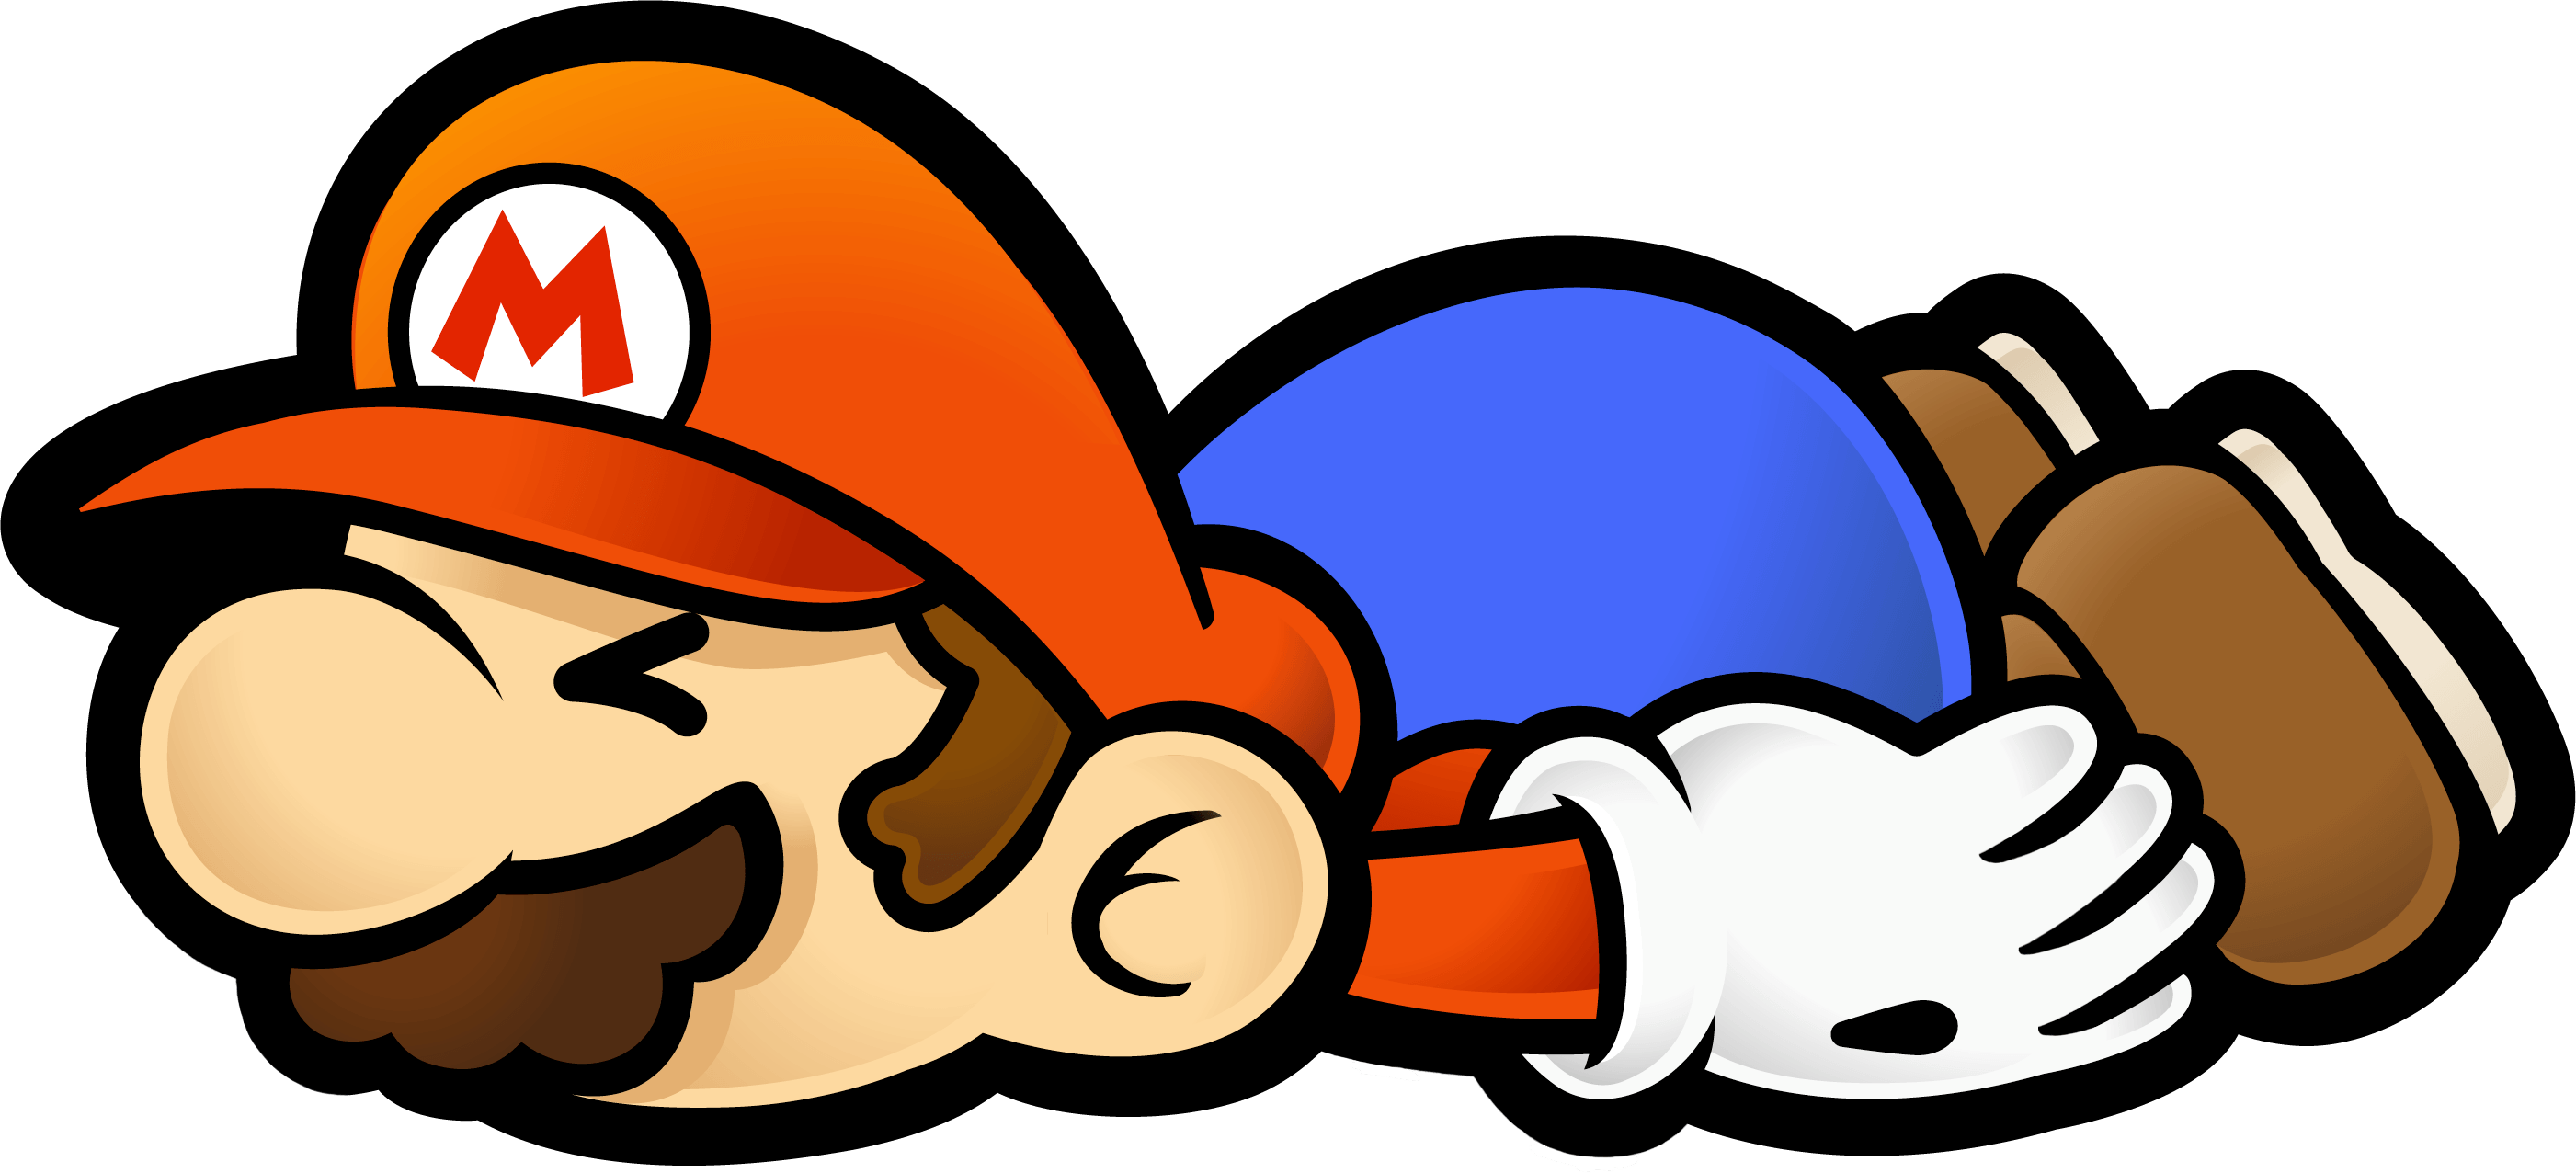 Mario_lying_down_after_getting_hurt.png